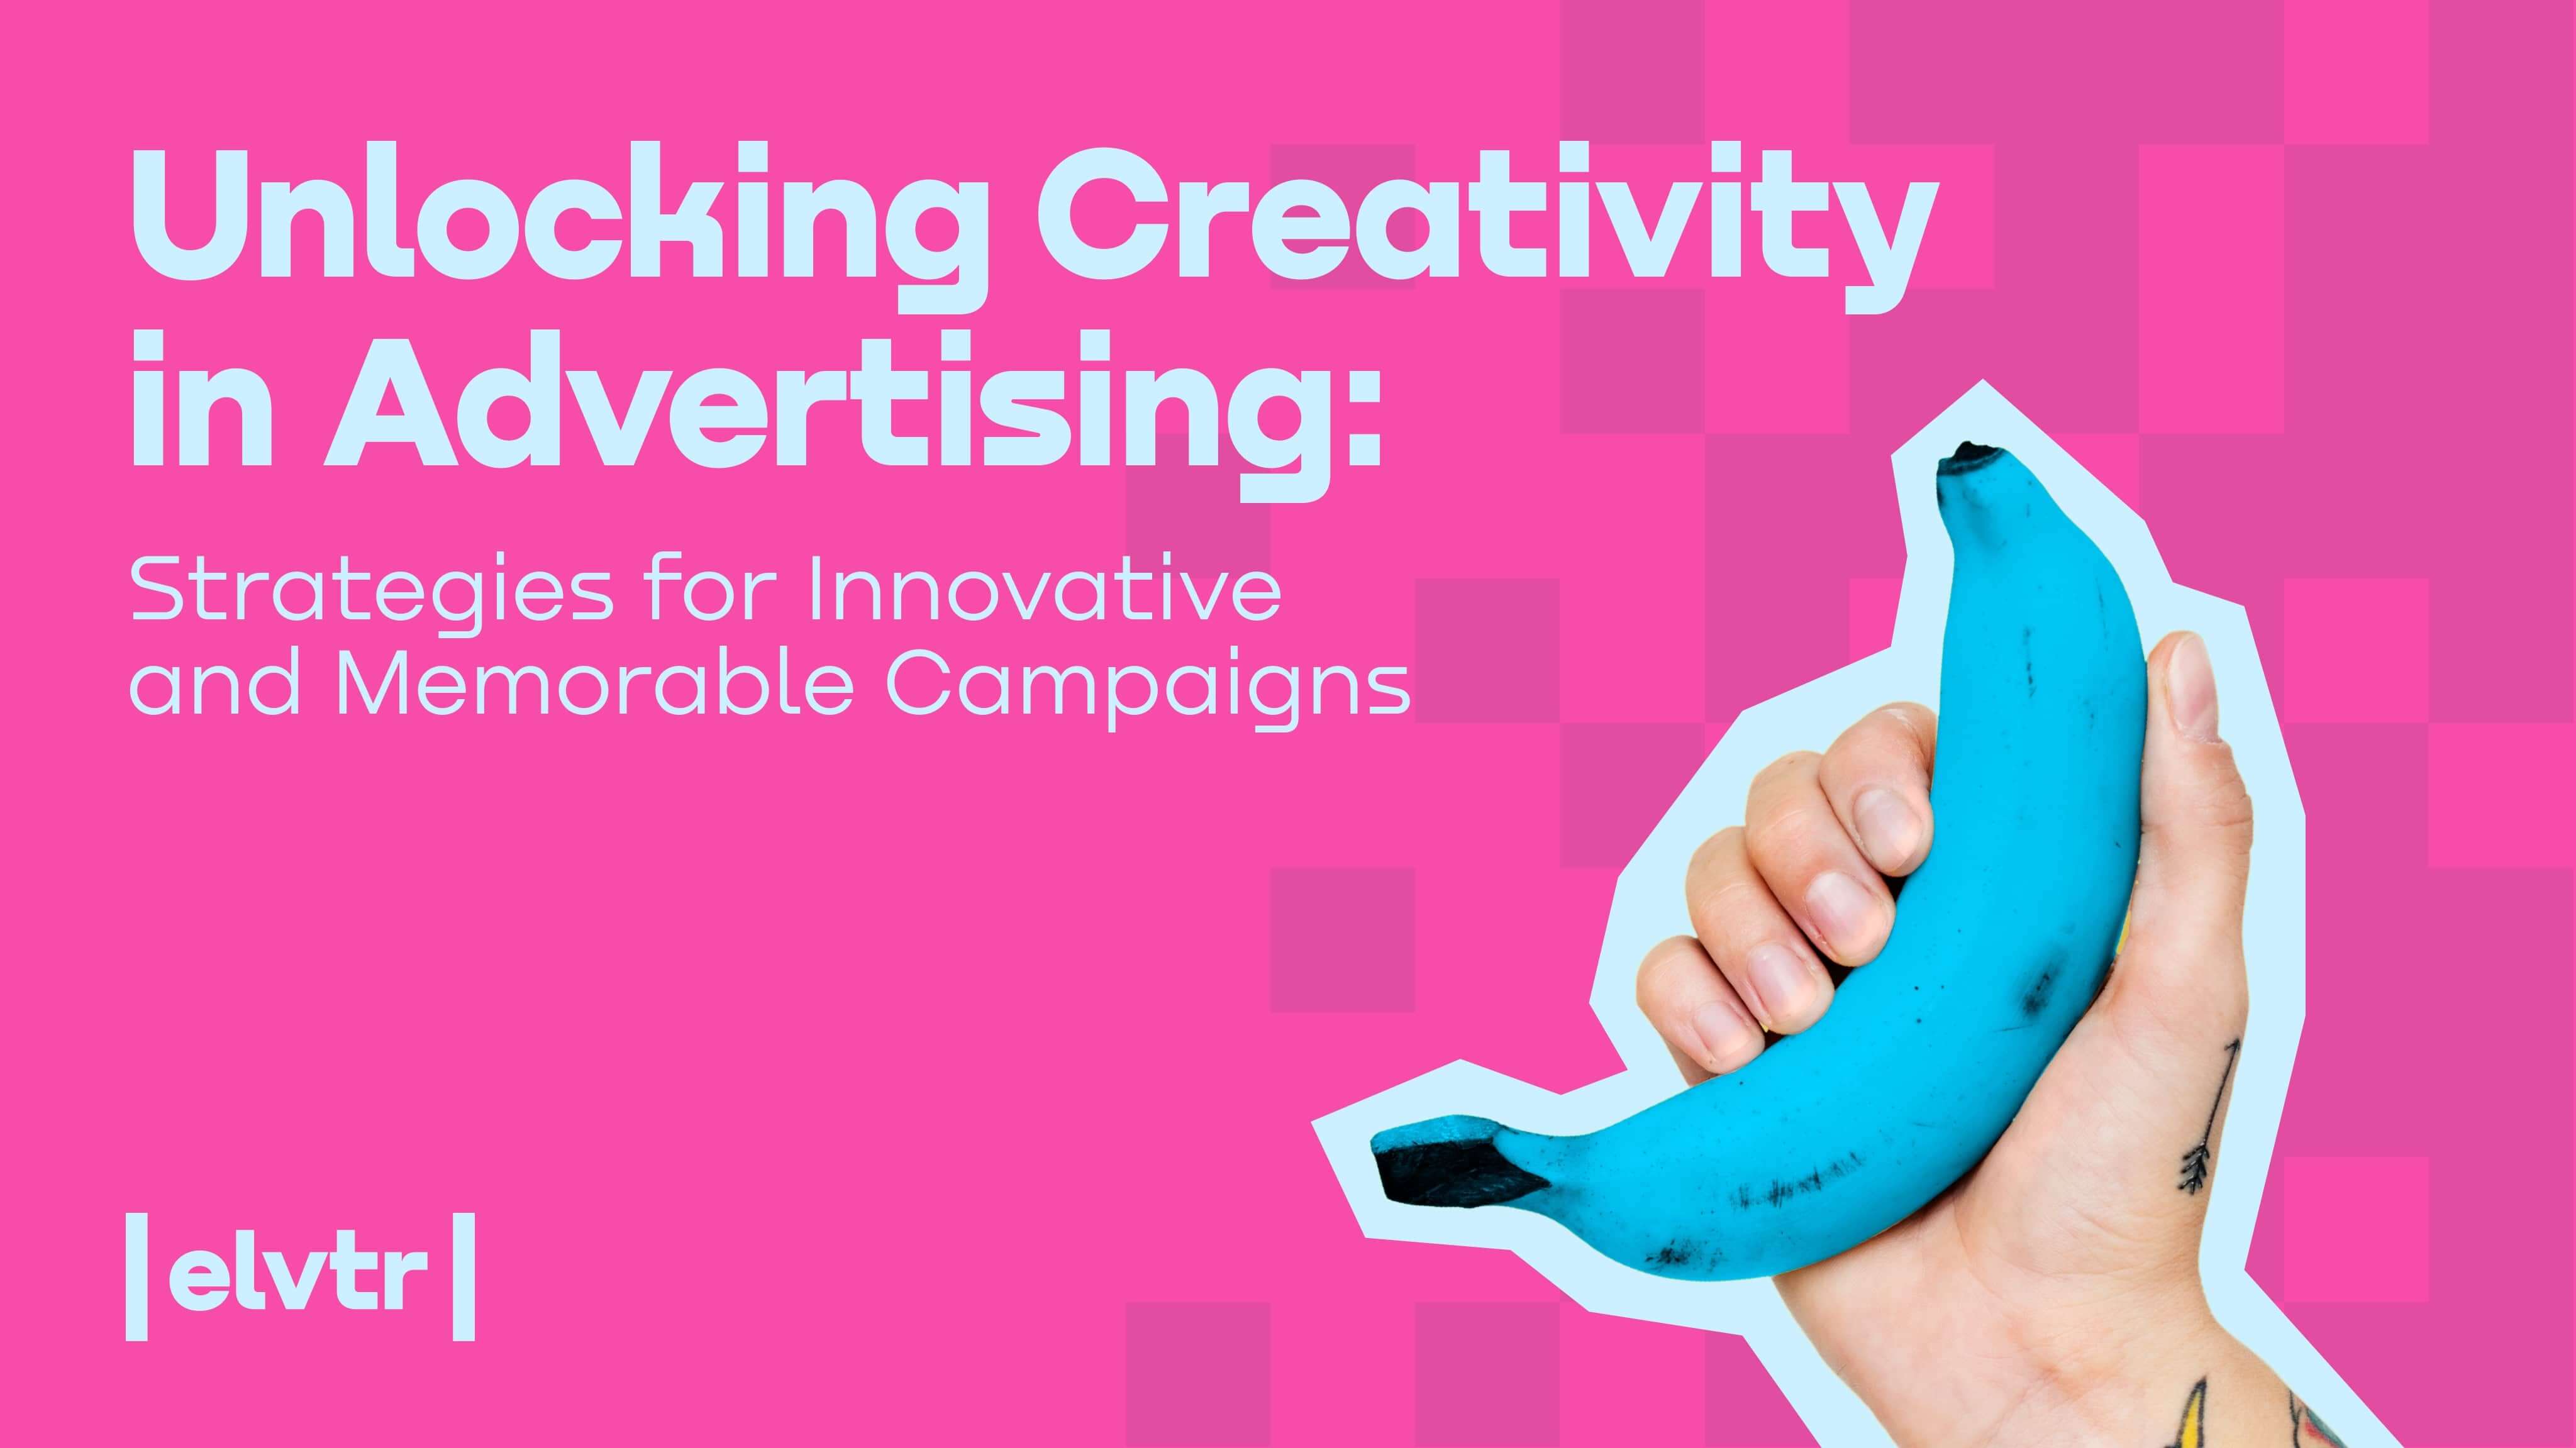 Unlocking Creativity in Advertising: Strategies for Innovative and Memorable Campaigns image